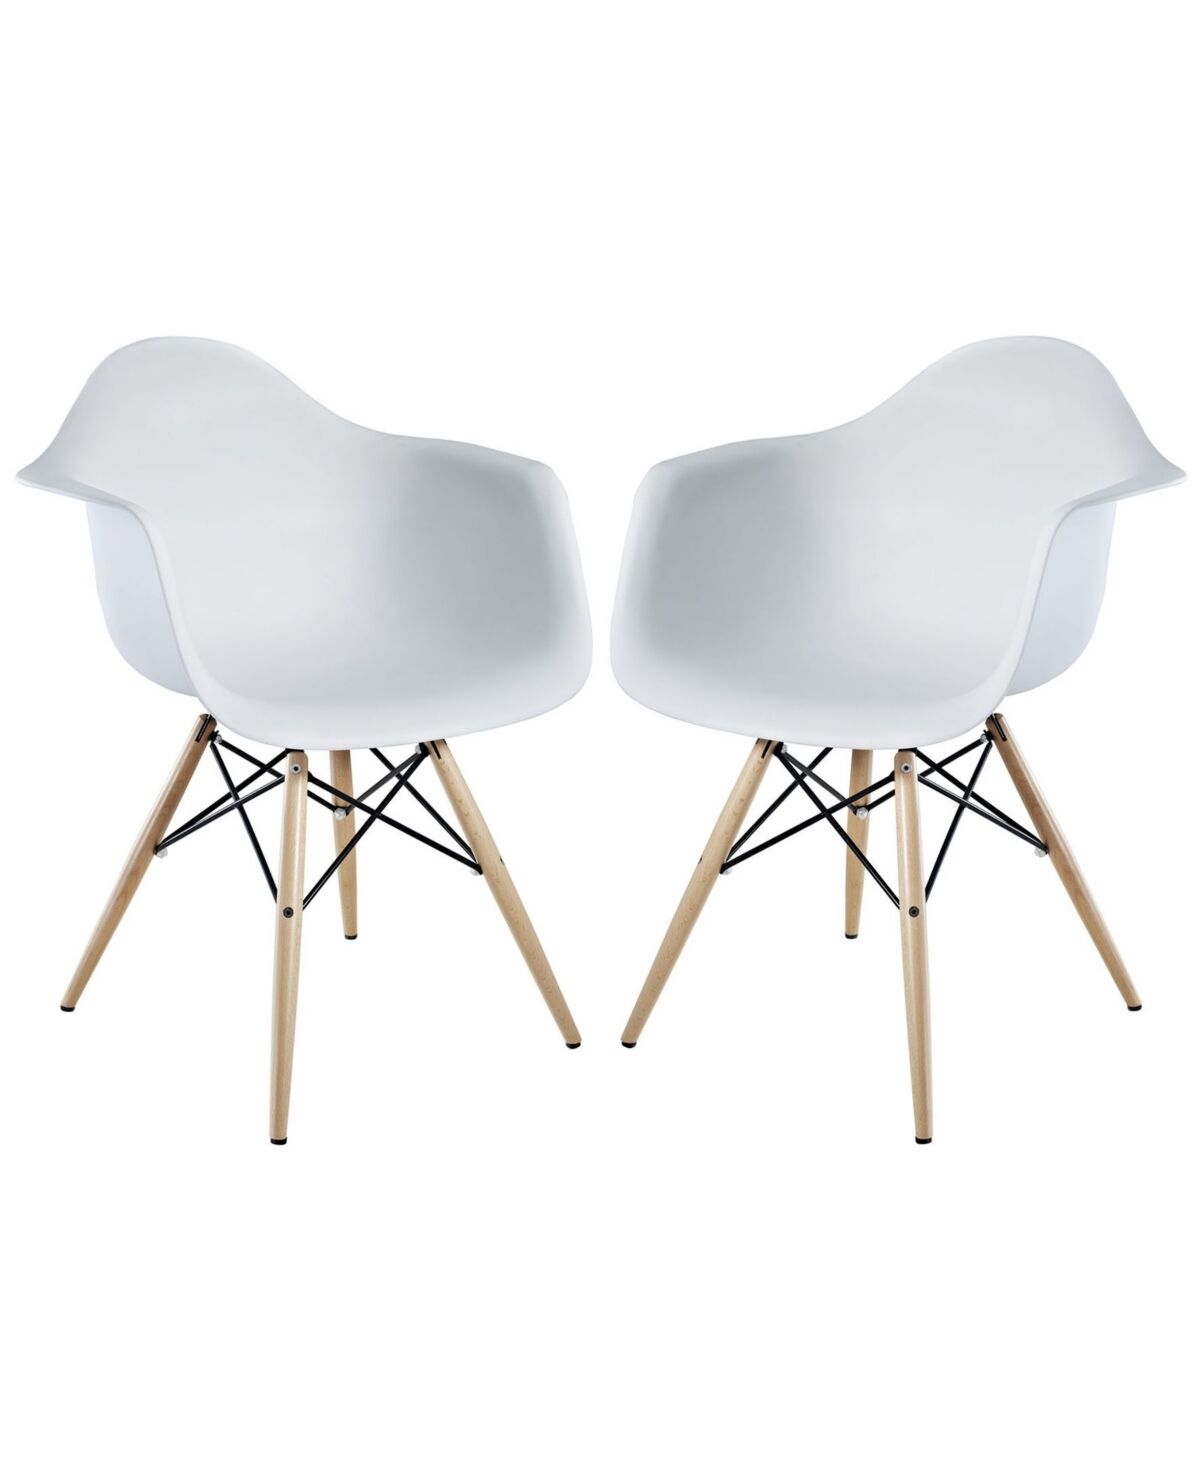 Modway Pyramid Dining Armchair Set of 2 - White